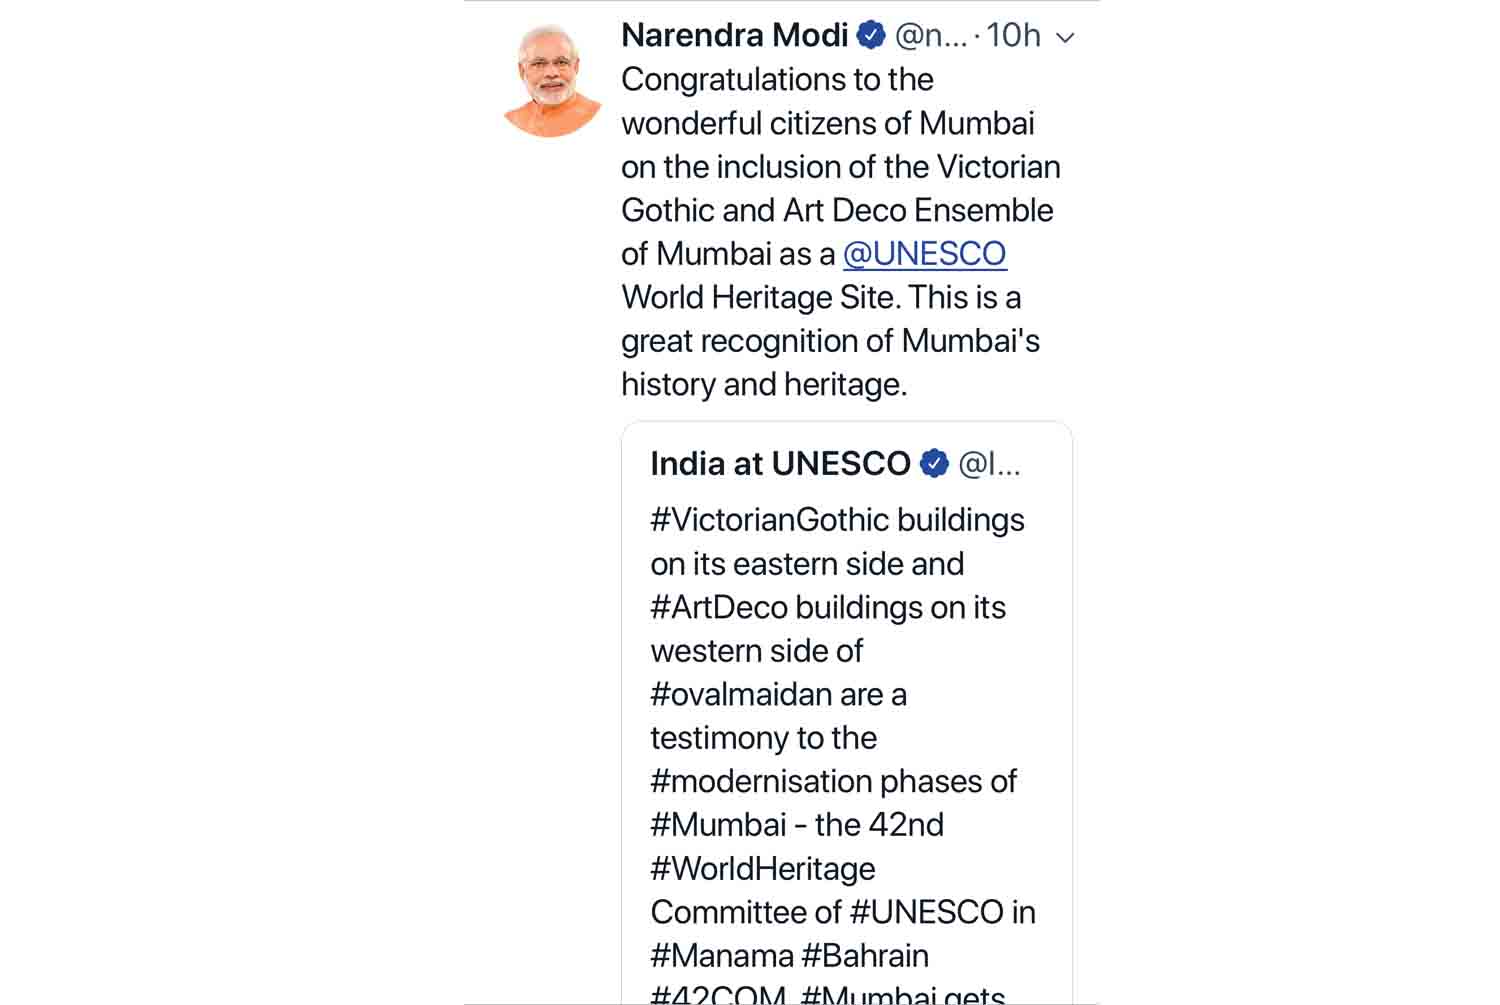 Prime Minister Tweet's about the inscription